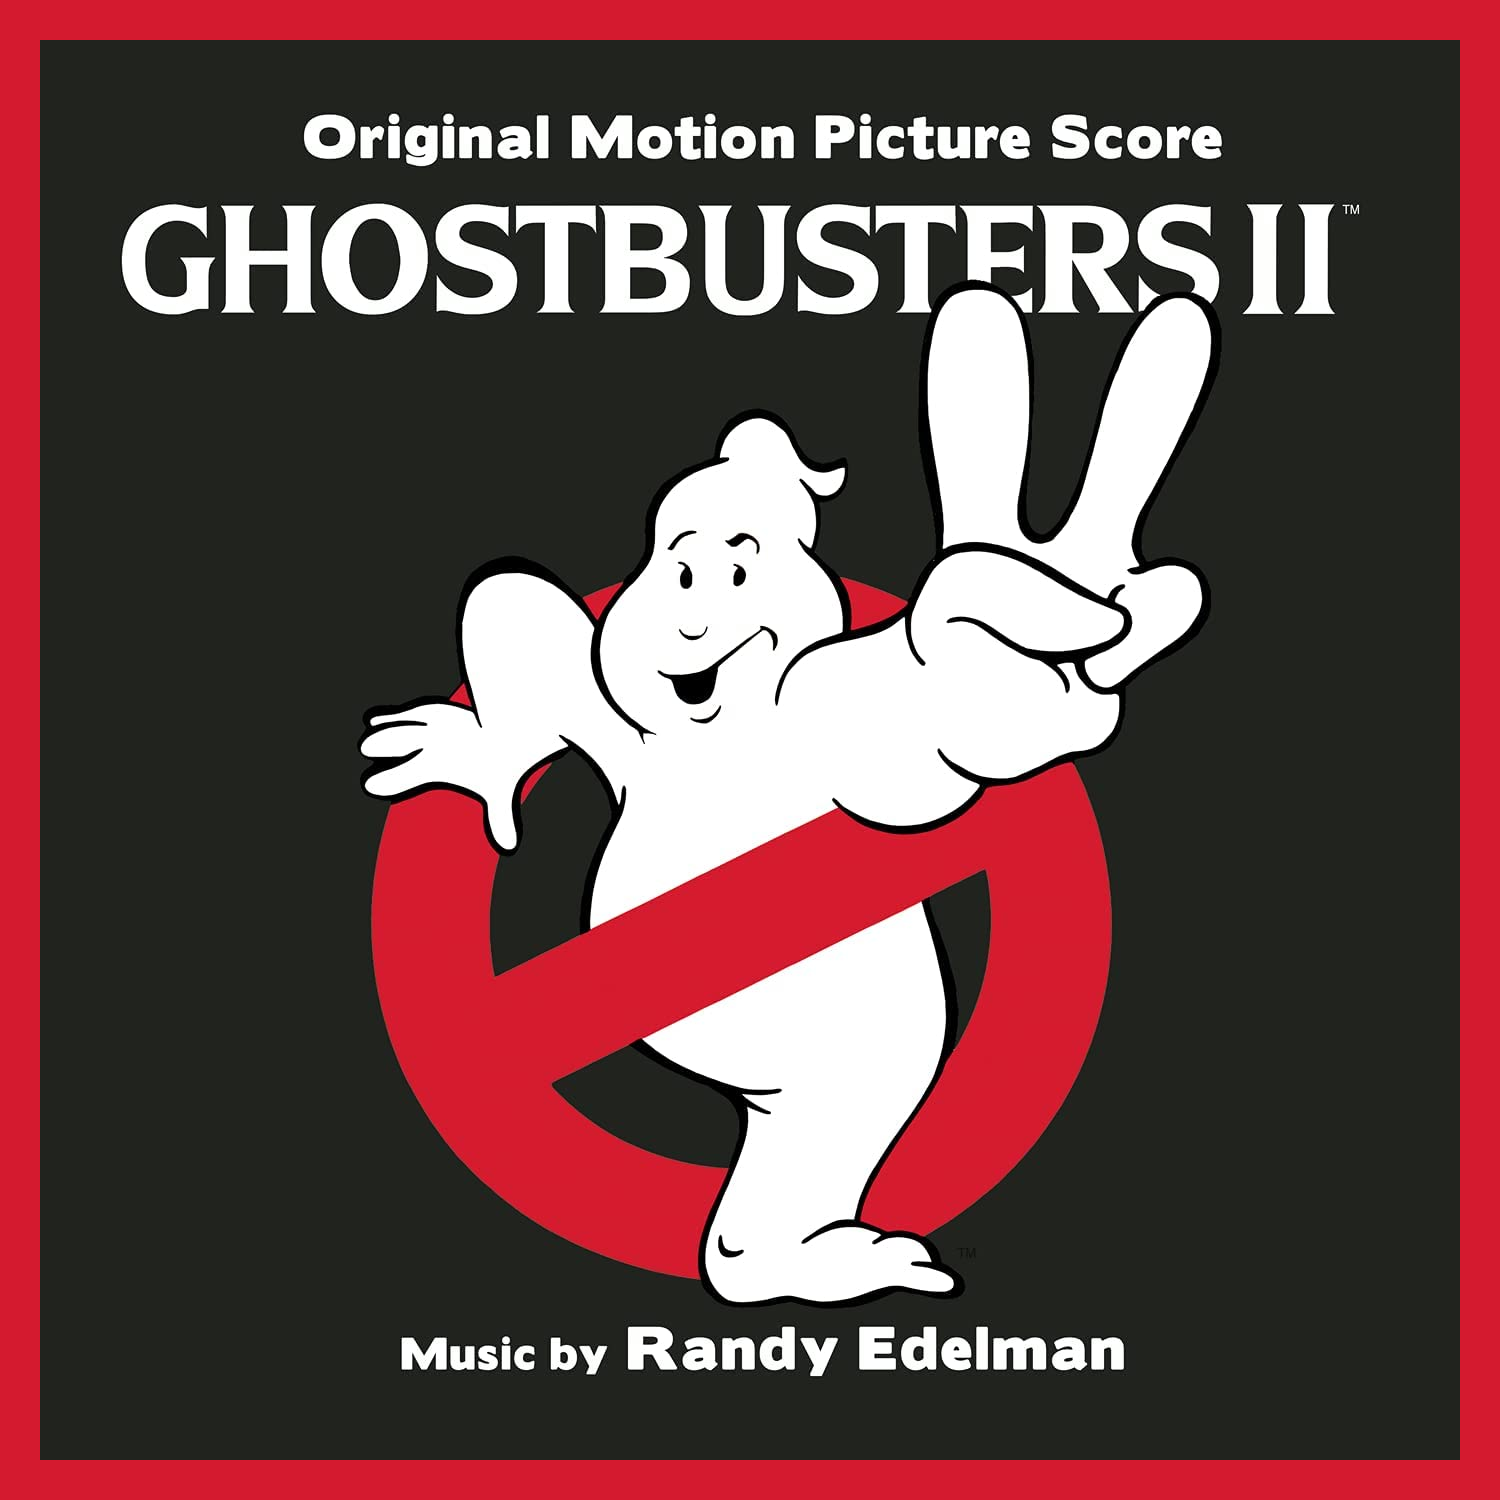 ghostbusters 2 song list